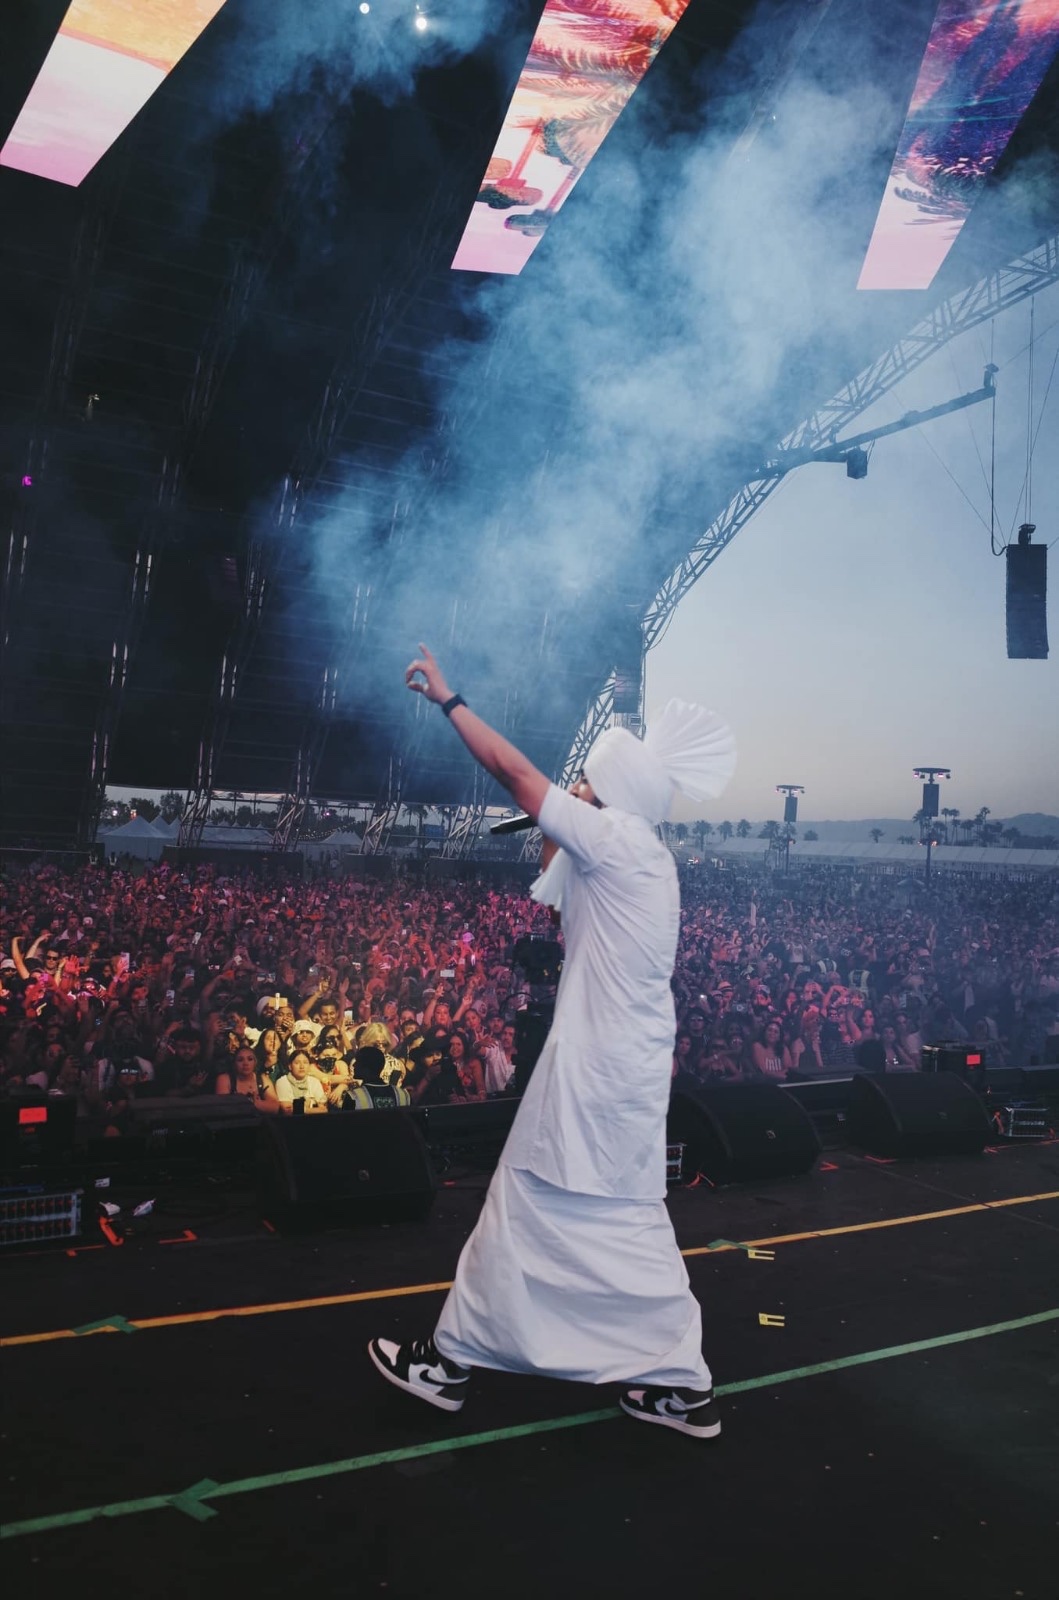 Diljit Dosanjh At Coachella: A Recognition Of Indian Music